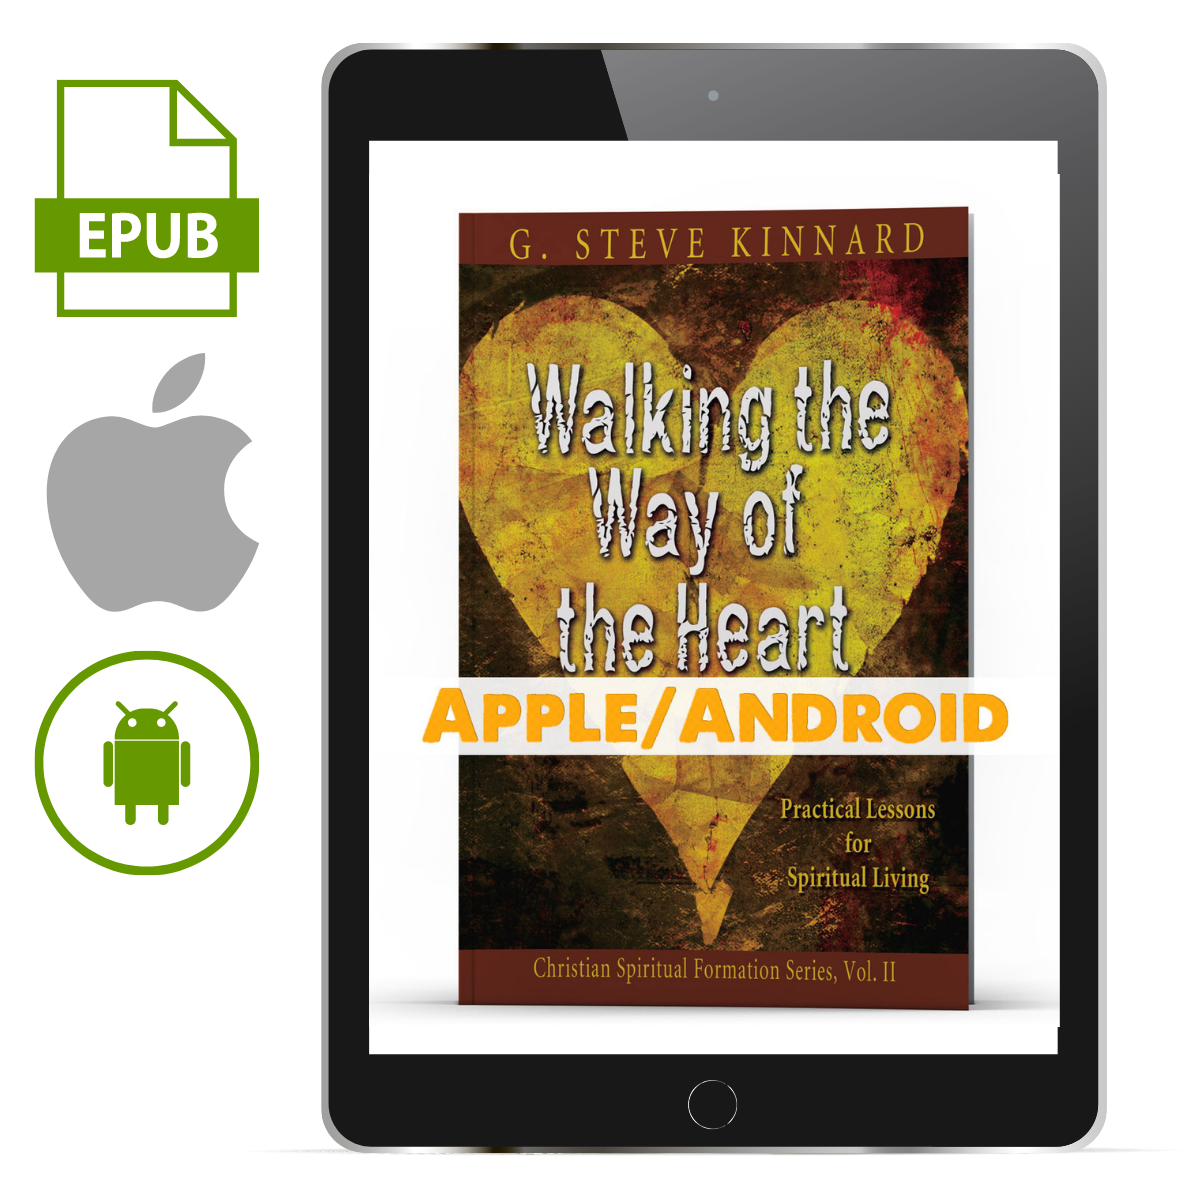 Walking the Way of the Heart Vol. 2 Apple/Android - Illumination Publishers